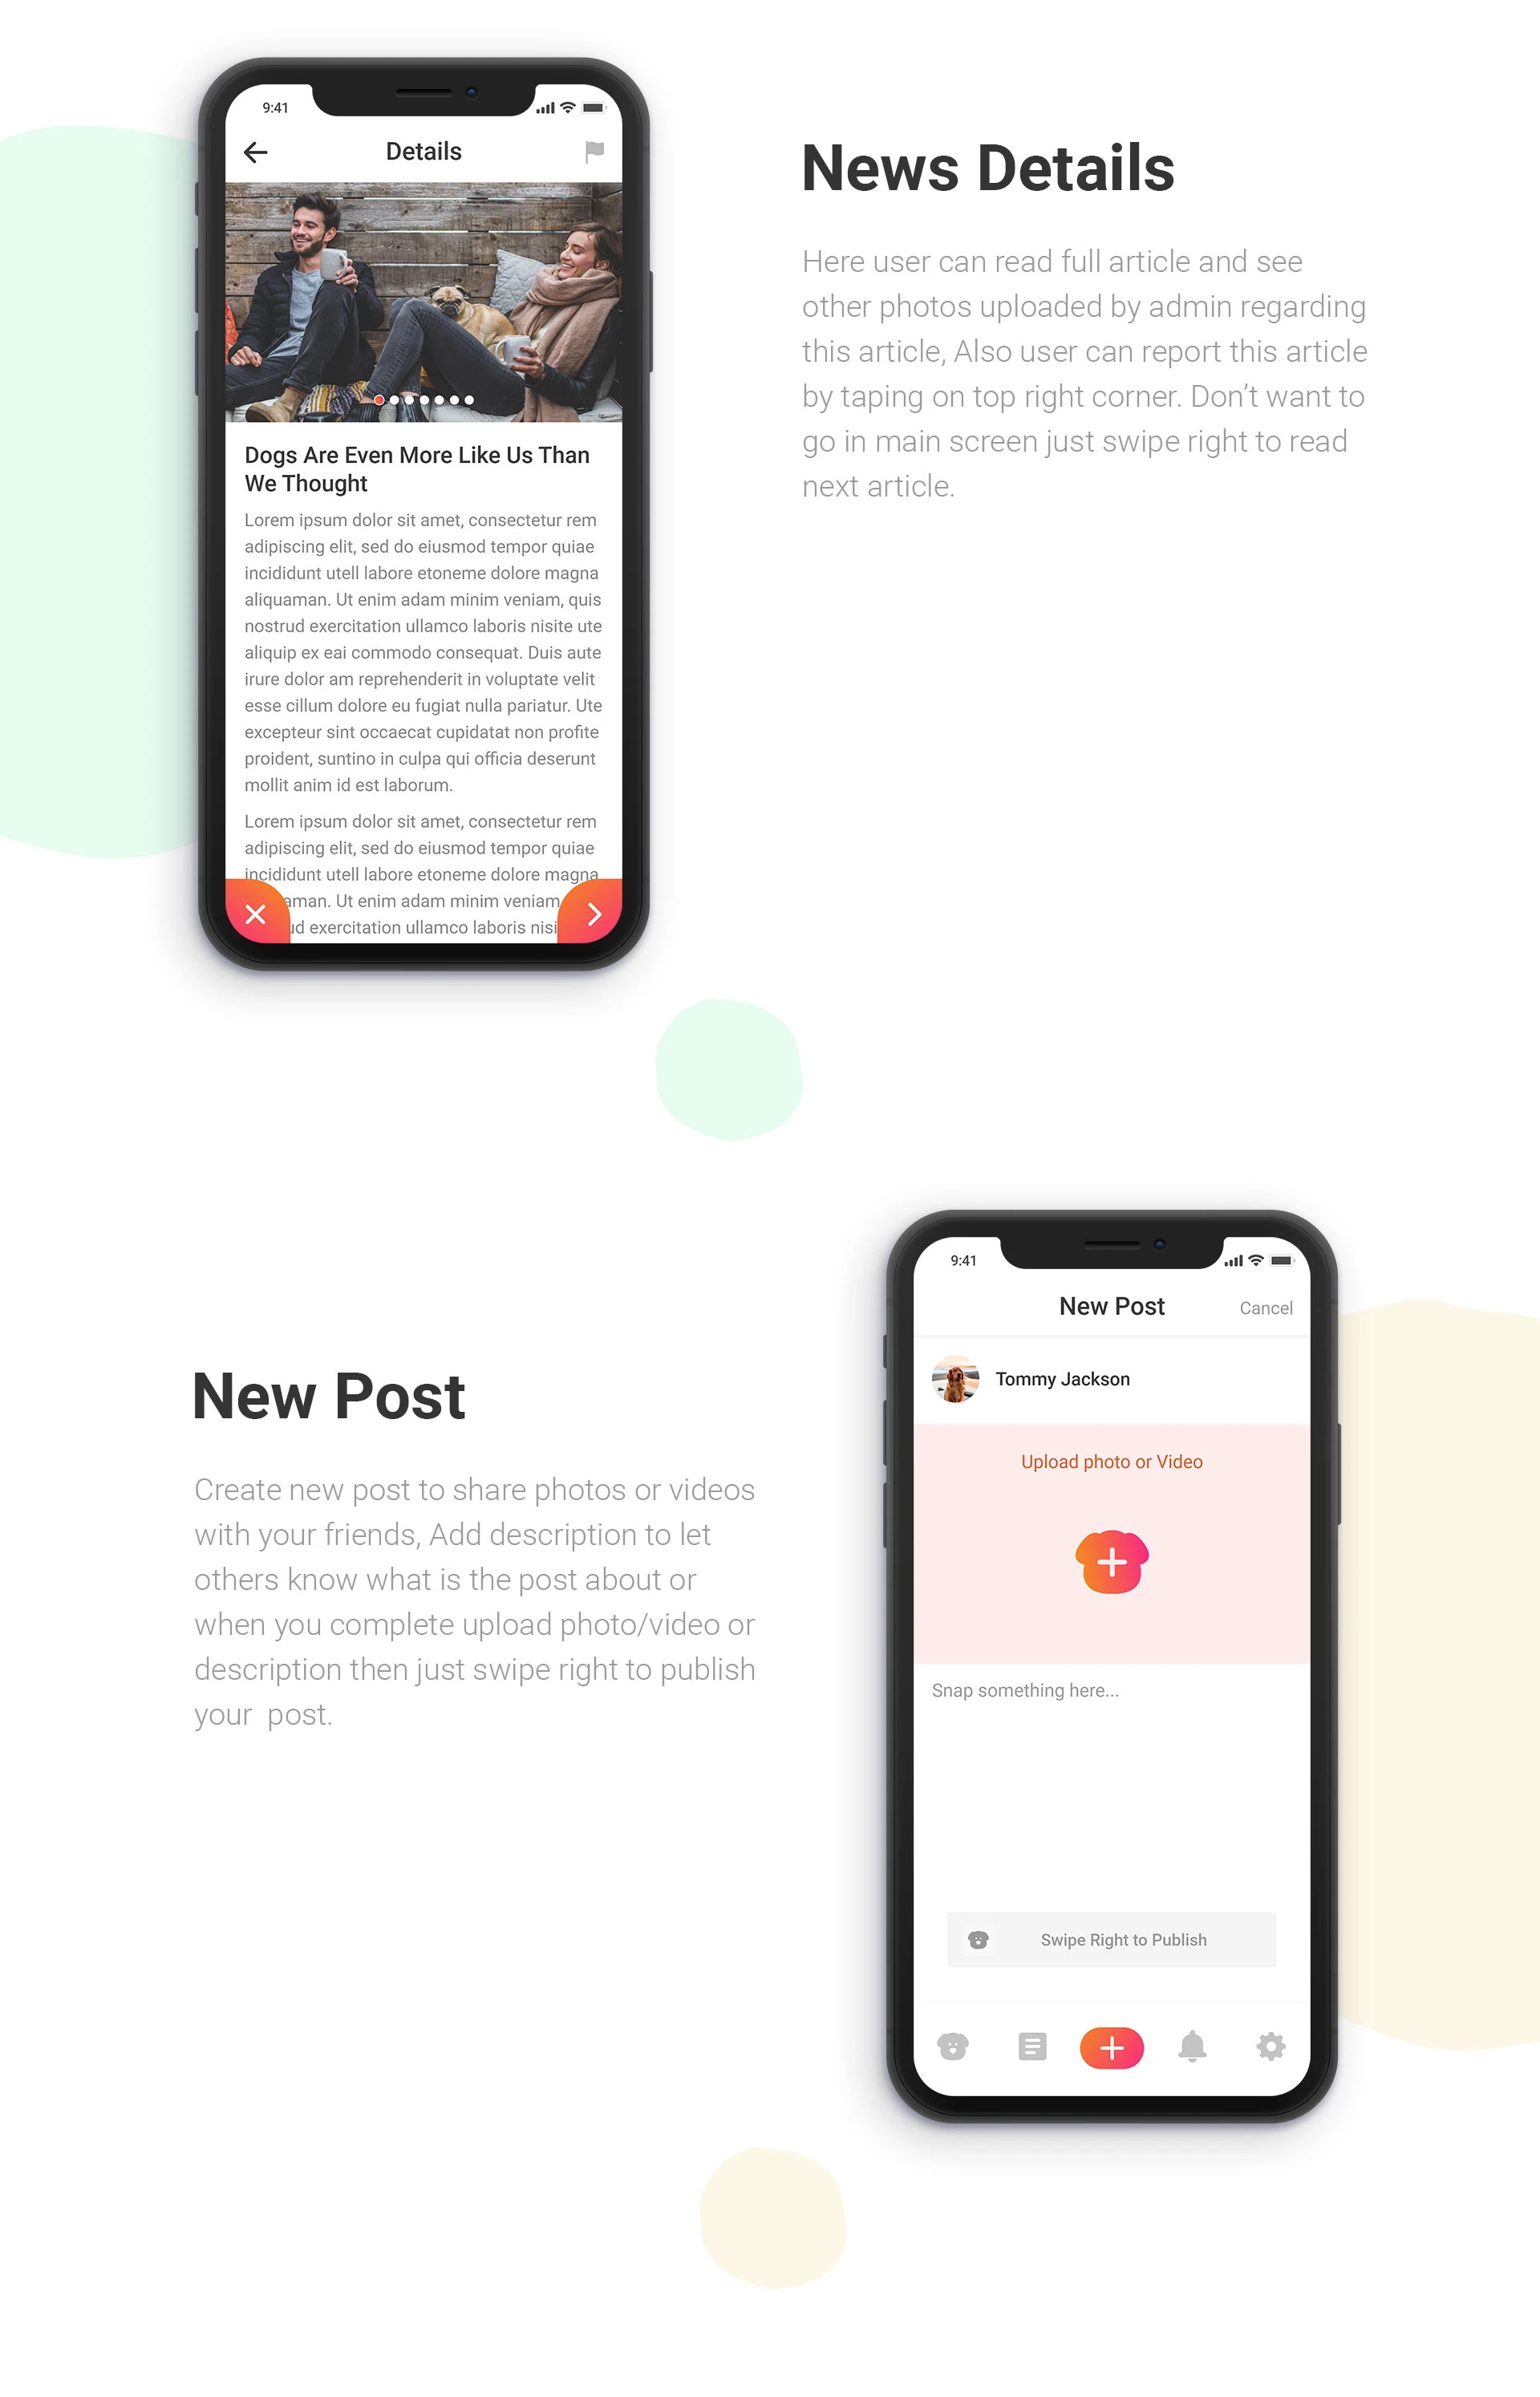 Doglife UI Kit Free for Adobe XD - Doglife is an app for dogs and dogs lovers, who loves to share photos of their dogs and dog's lifestyle. Minimal and clean app design, ready for you to get started.